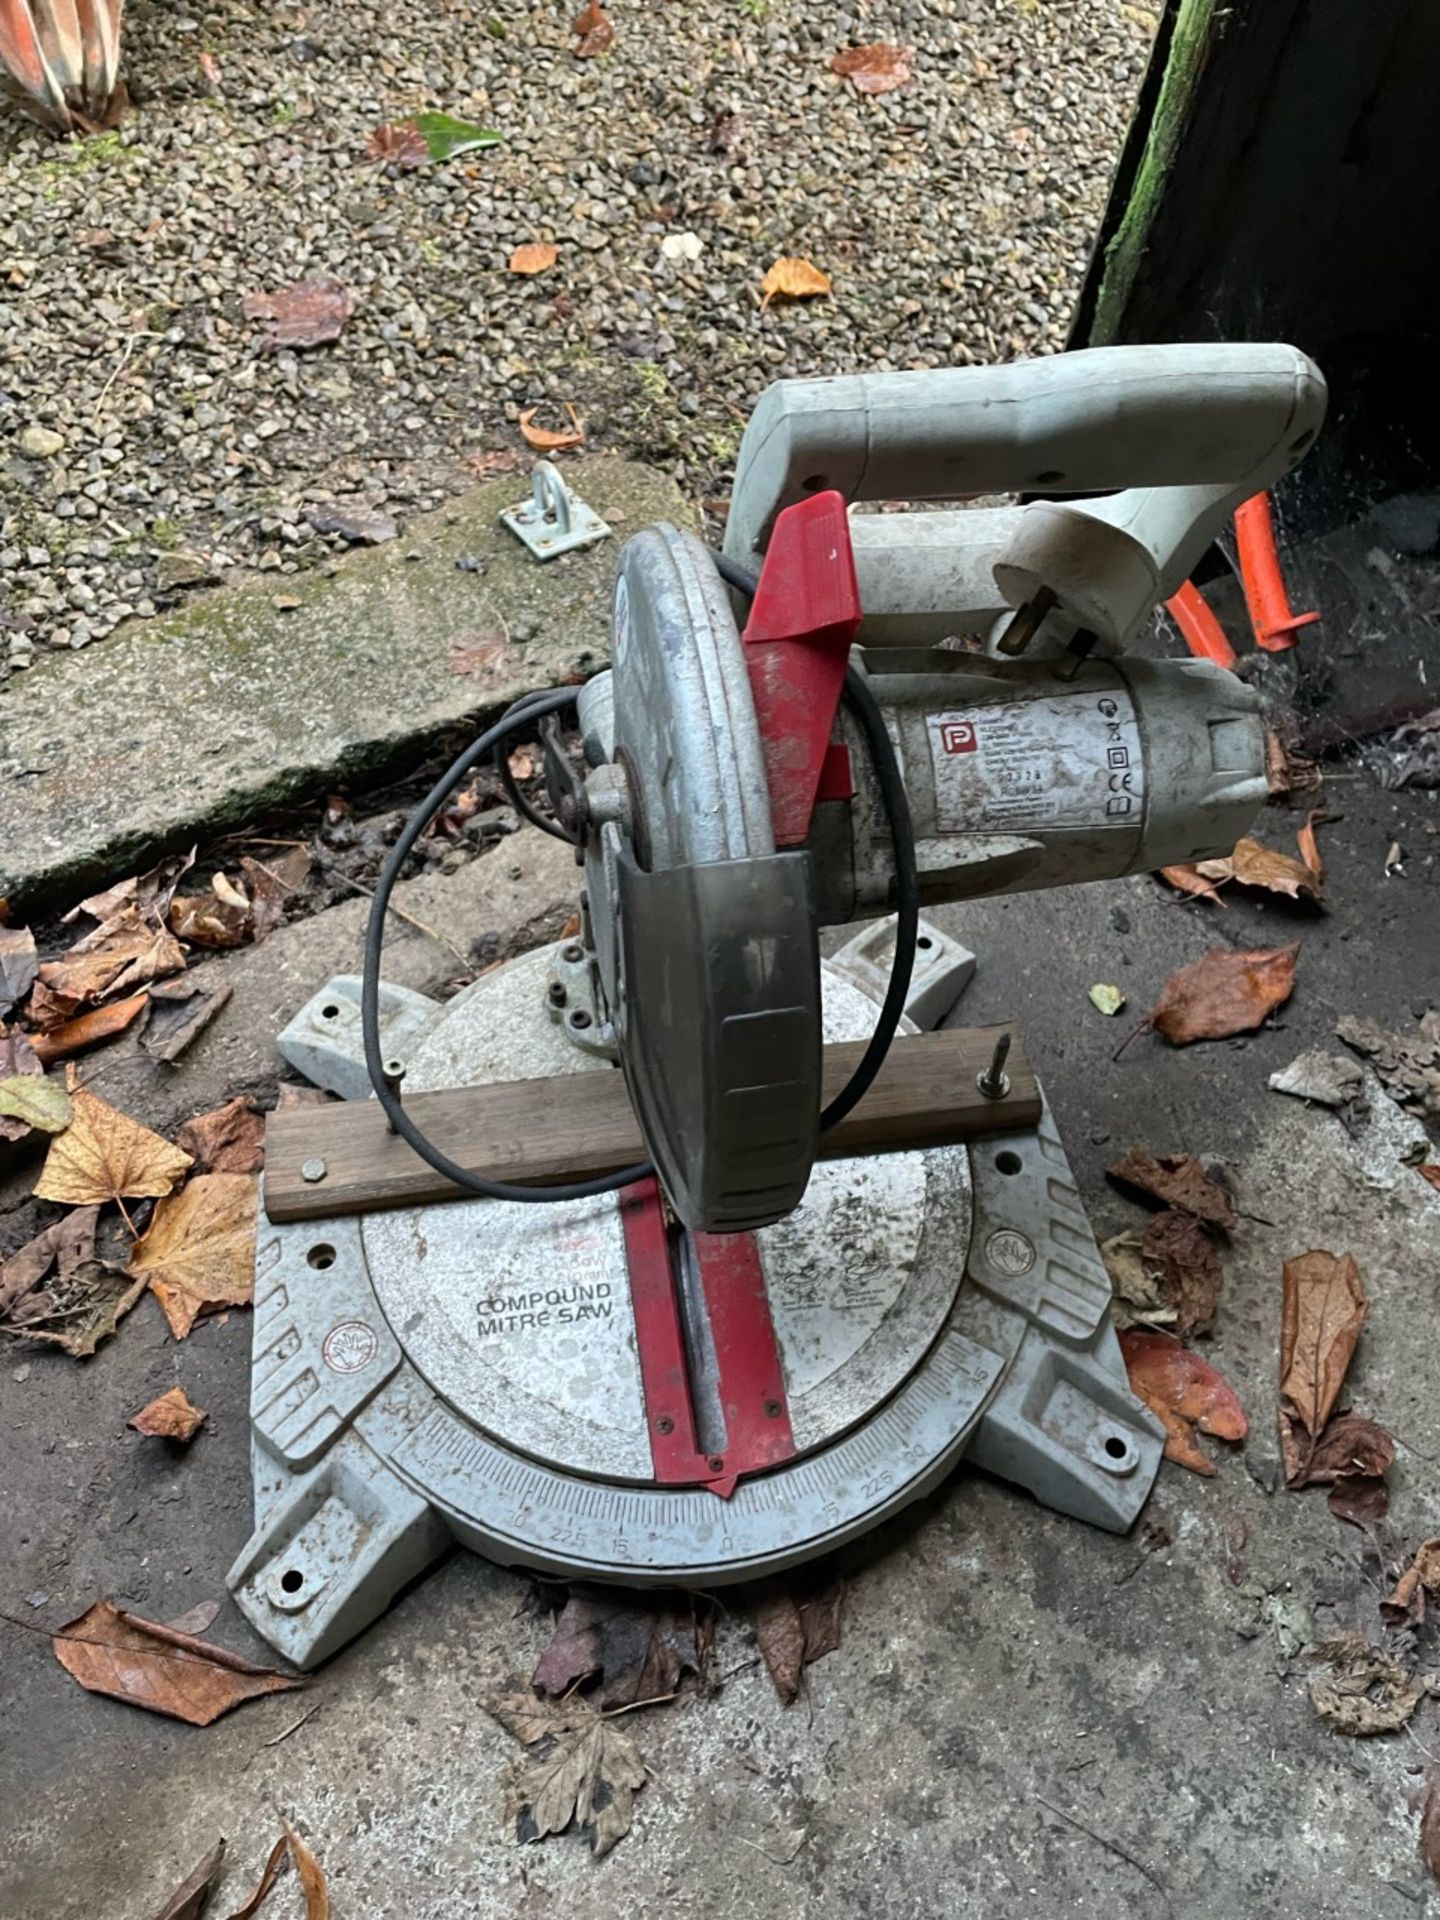 230v compound miter saw spares or repair